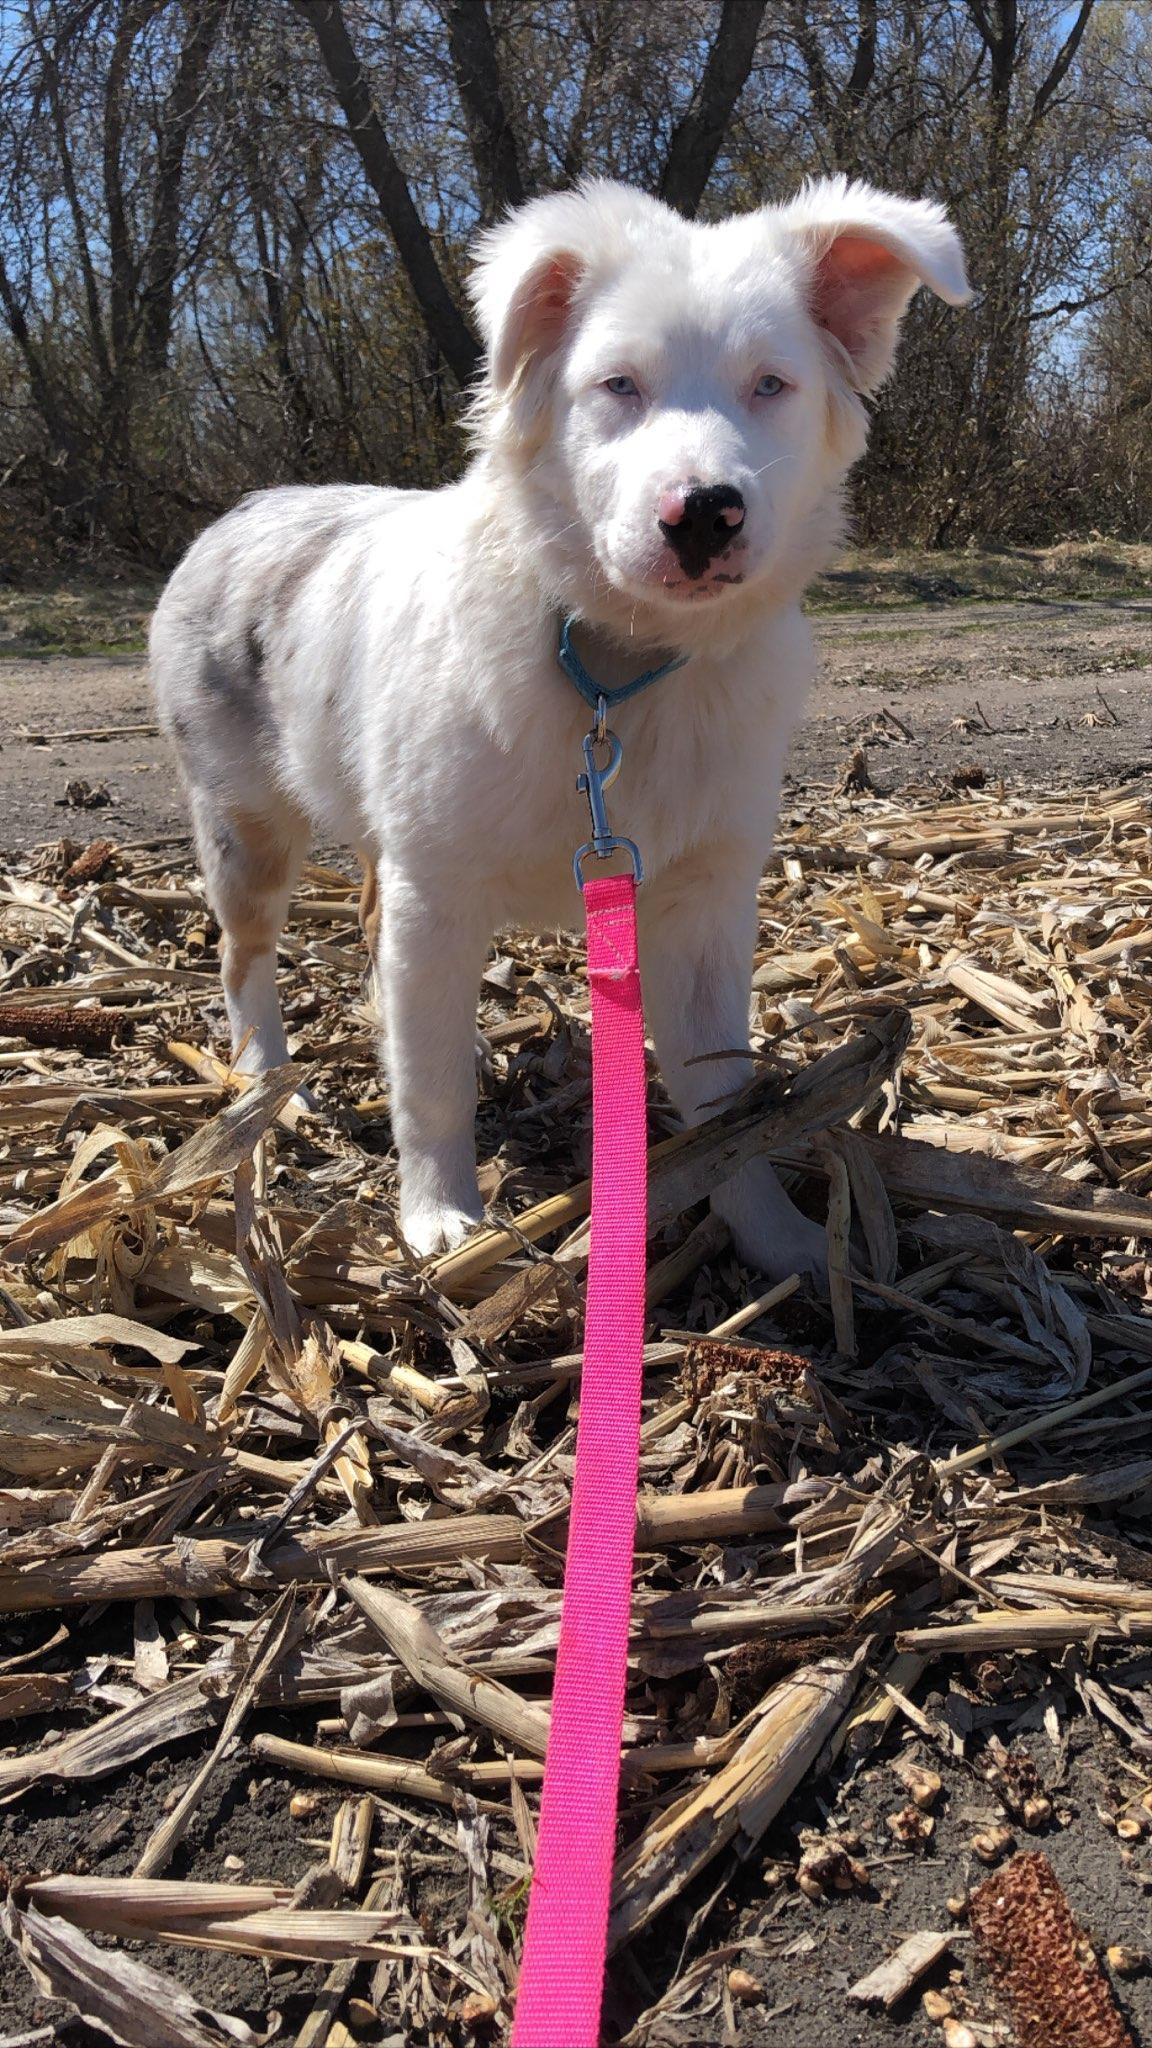 A white dog on a hot pink leash looks at the camera.